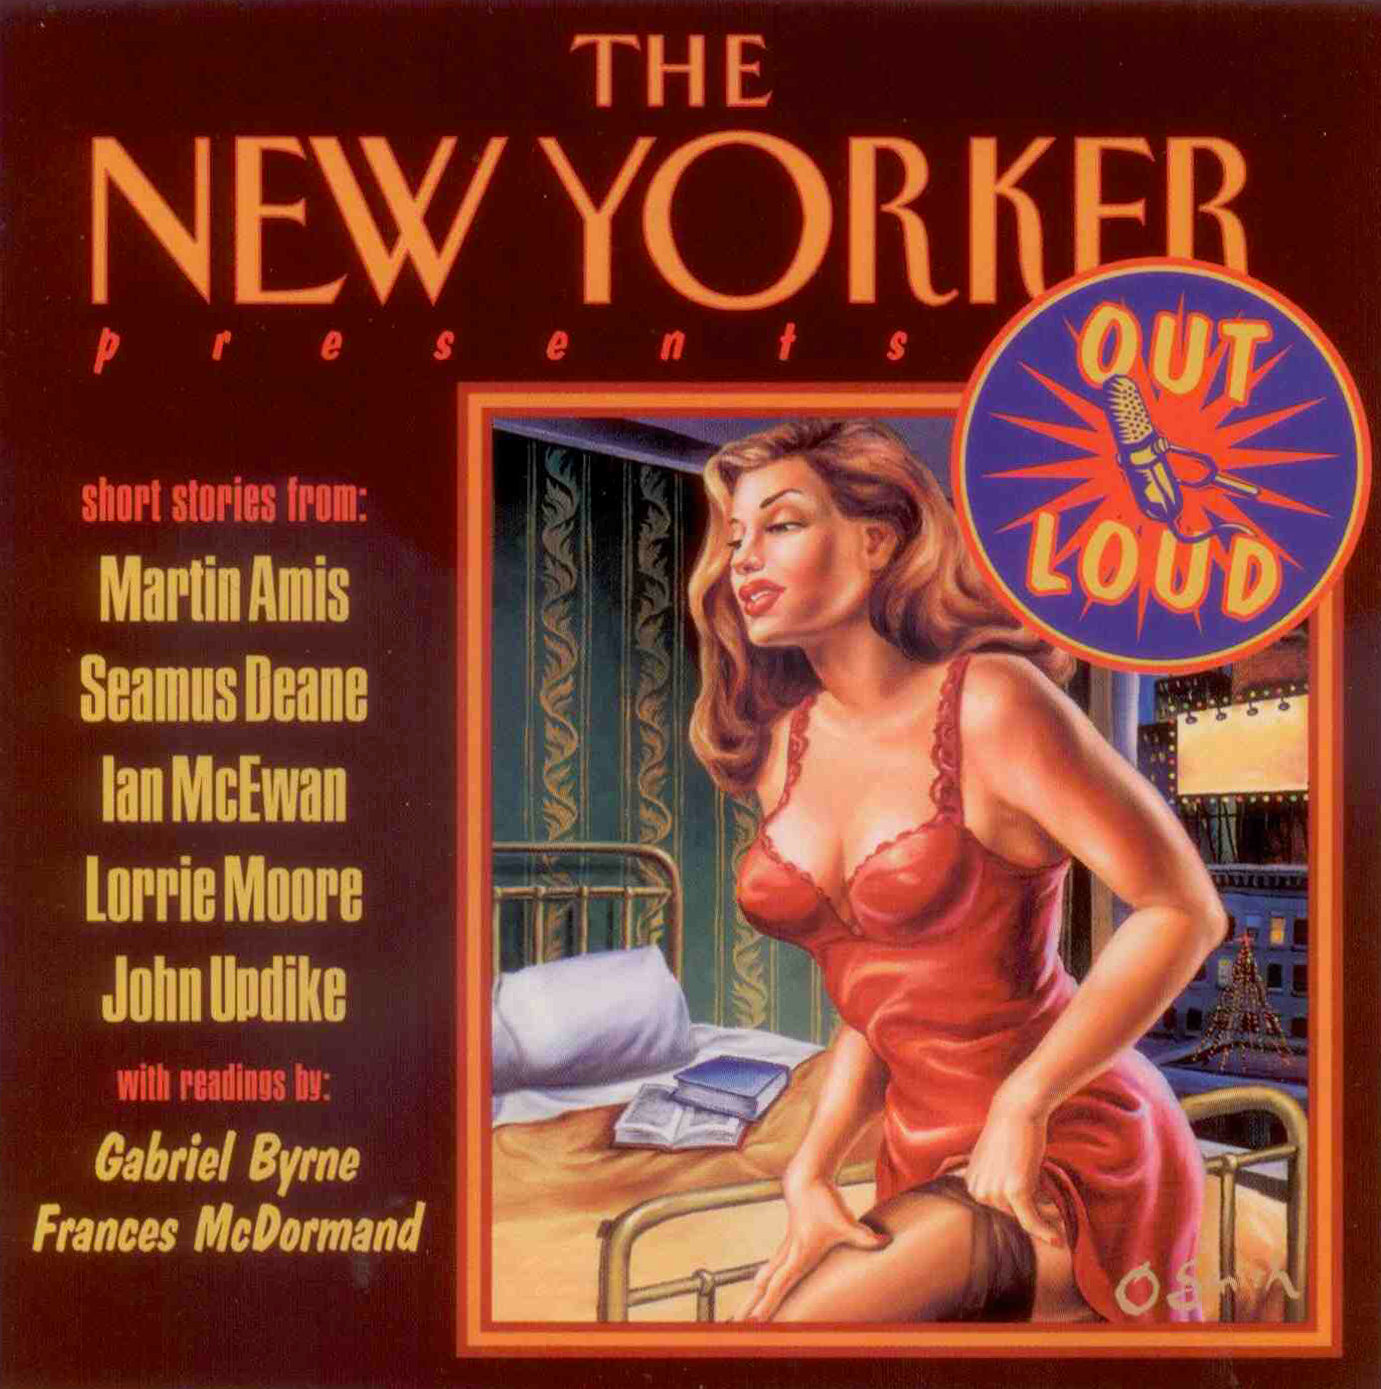 The New Yorker Out Loud - 1997